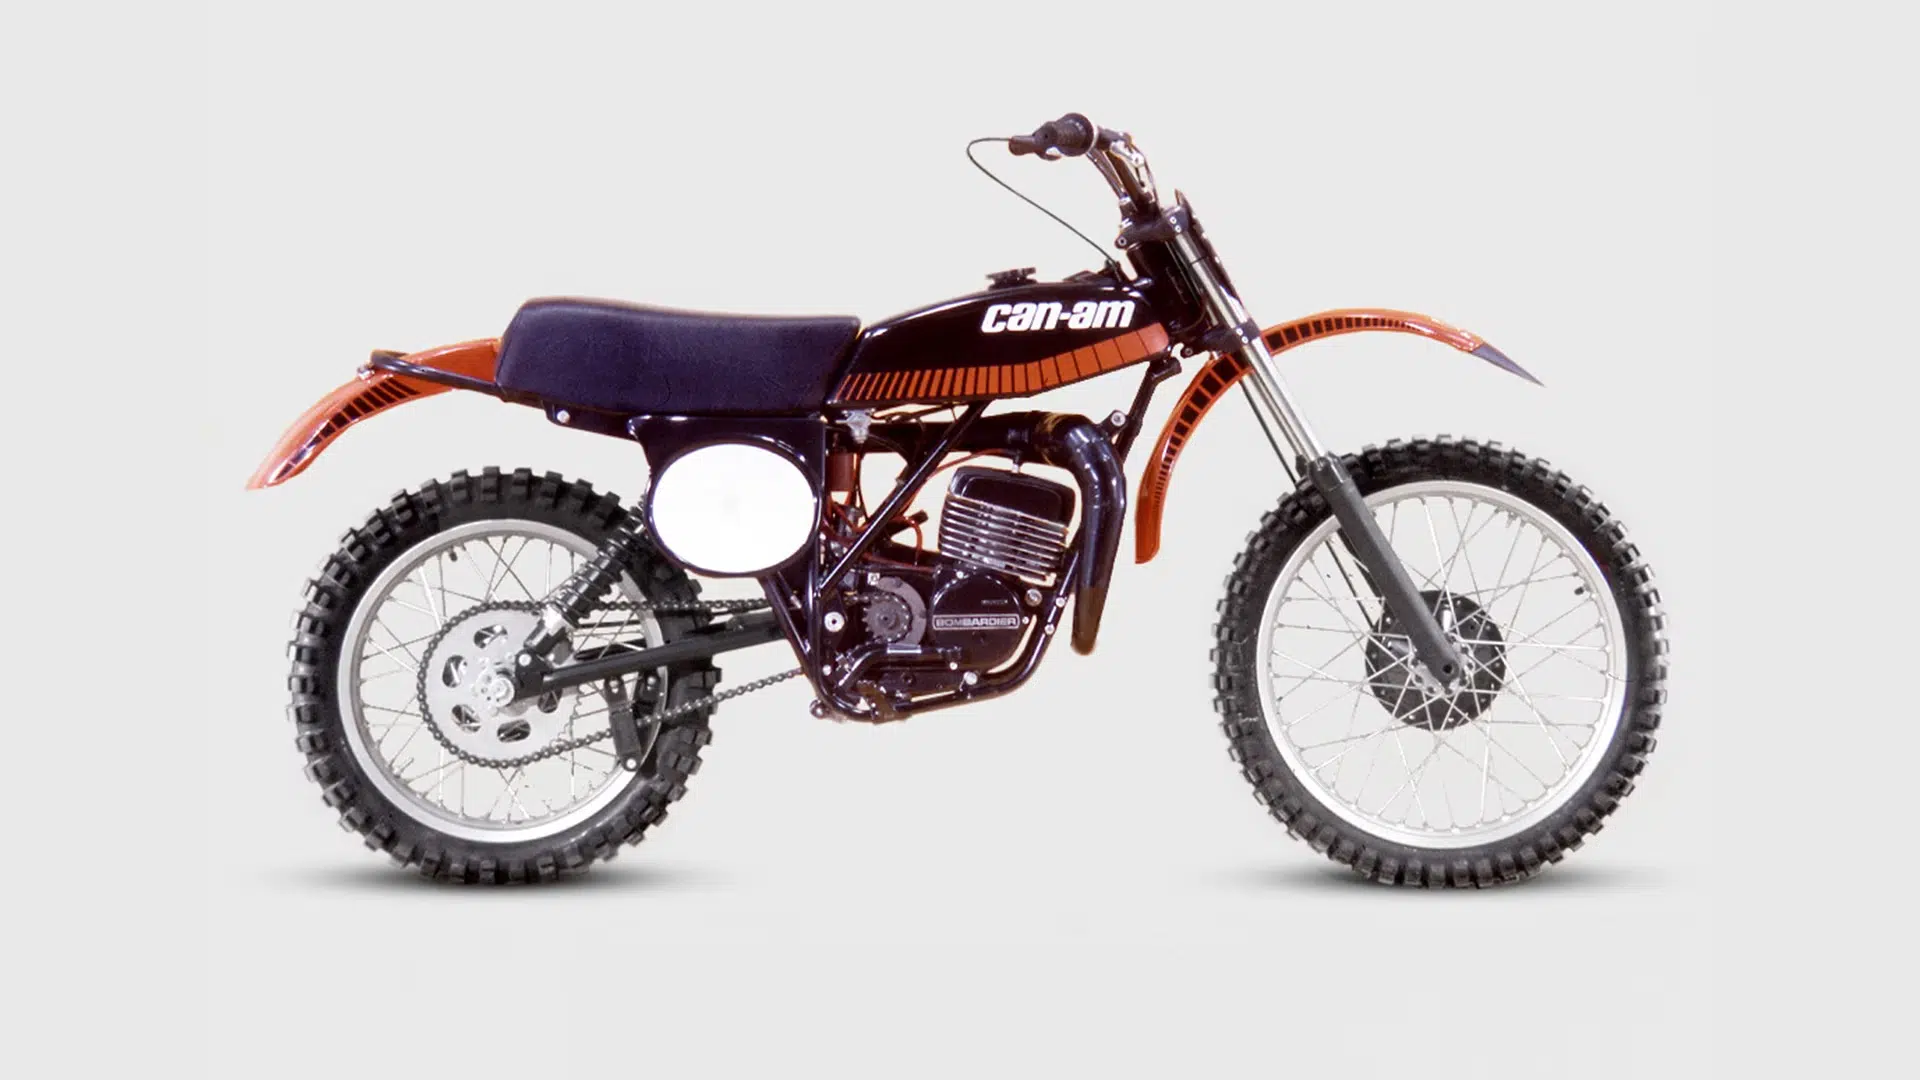 Can-Am Pulse and Origin motorcycles versus original Can-Am motorcycles from the 1970s. Do you see any similarities?